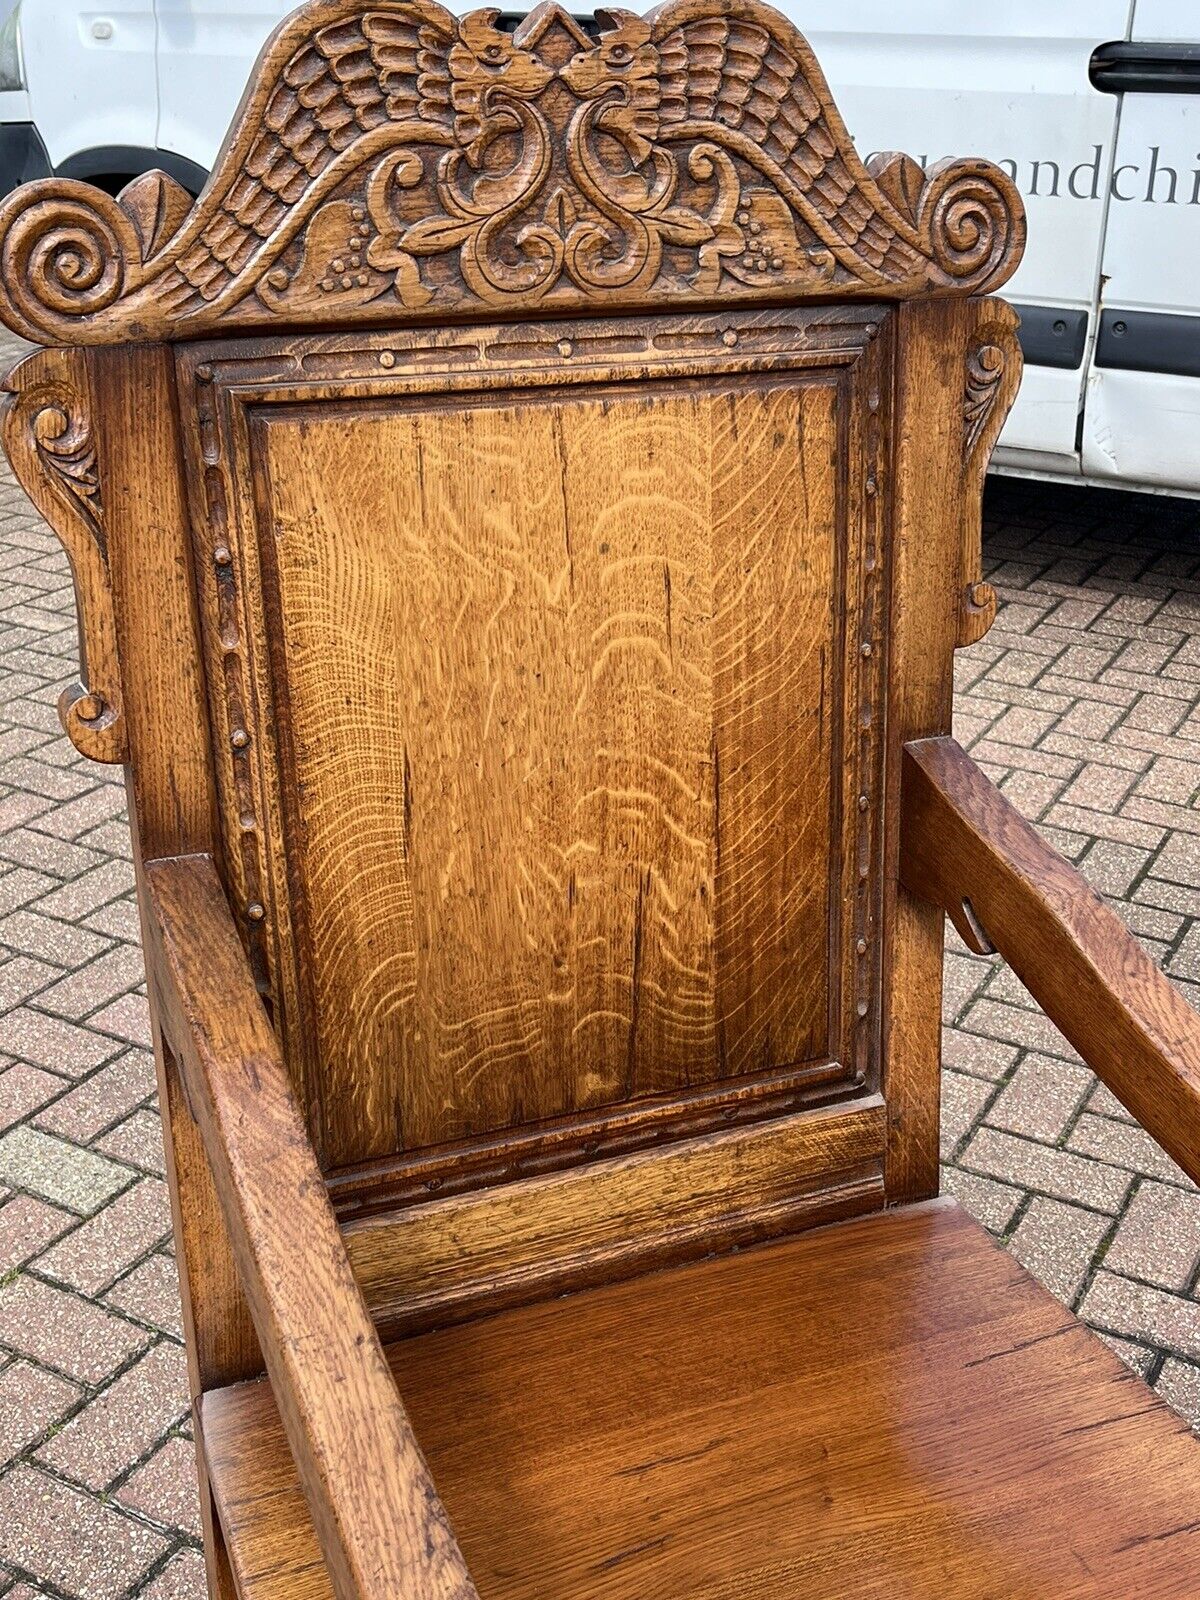 Oak Wainscot Chairs. Superb Carved Decoration.